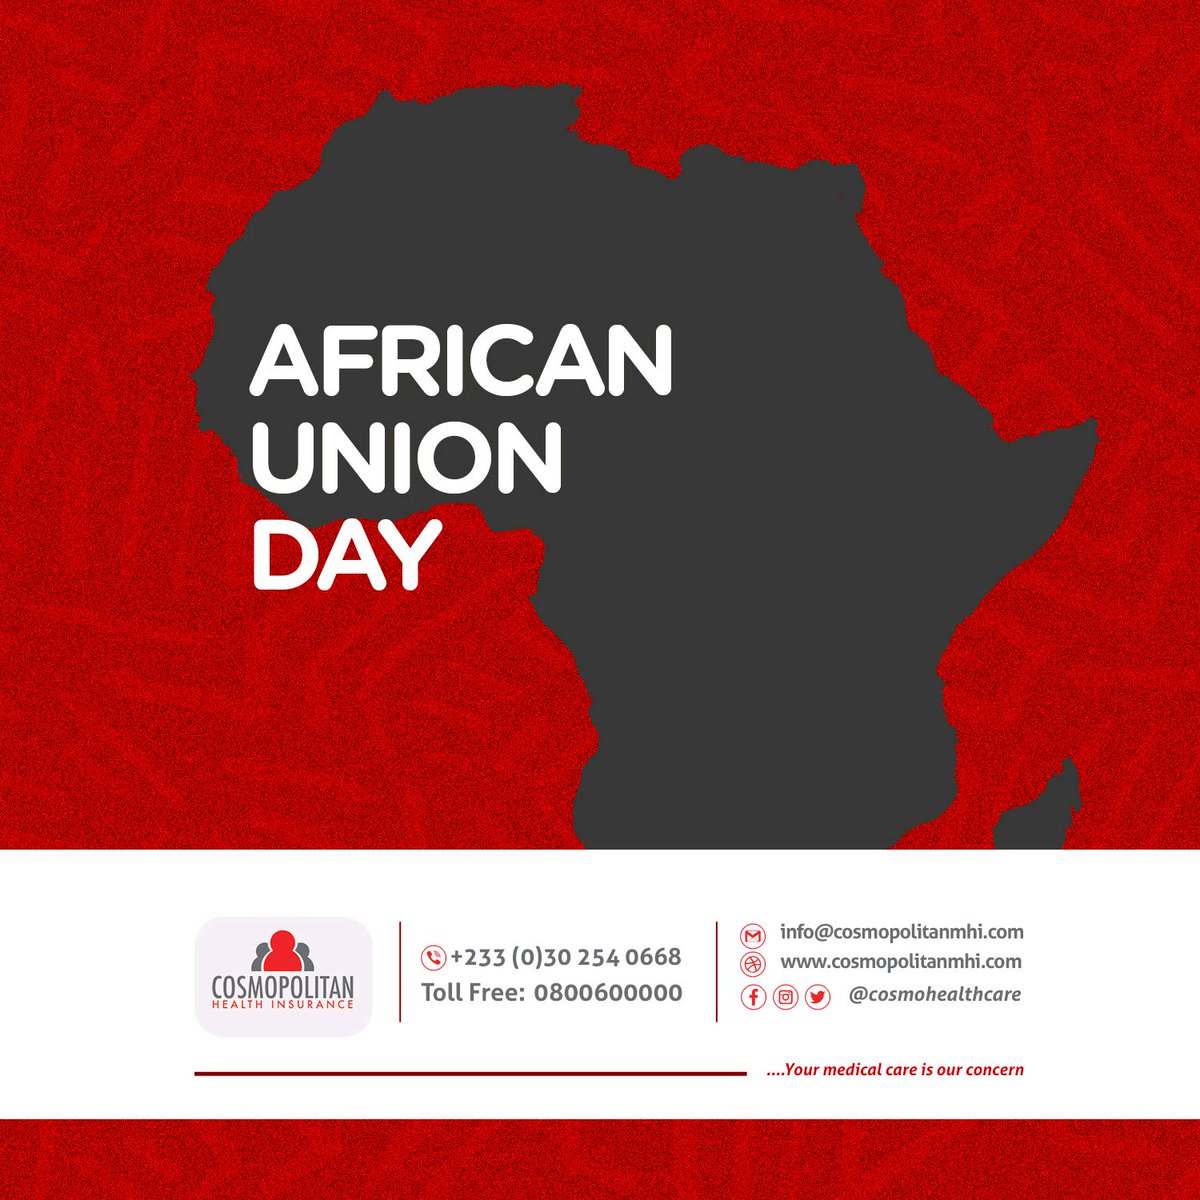 Happy African Union Day! 

Today we celebrate our rich and diverse heritage. 

At CHI, we believe in protecting and promoting our continent. 

That's why we've got you covered with our reliable insurance solutions...

Go AFRICA! 

#africanunionday #cosmohealthcare